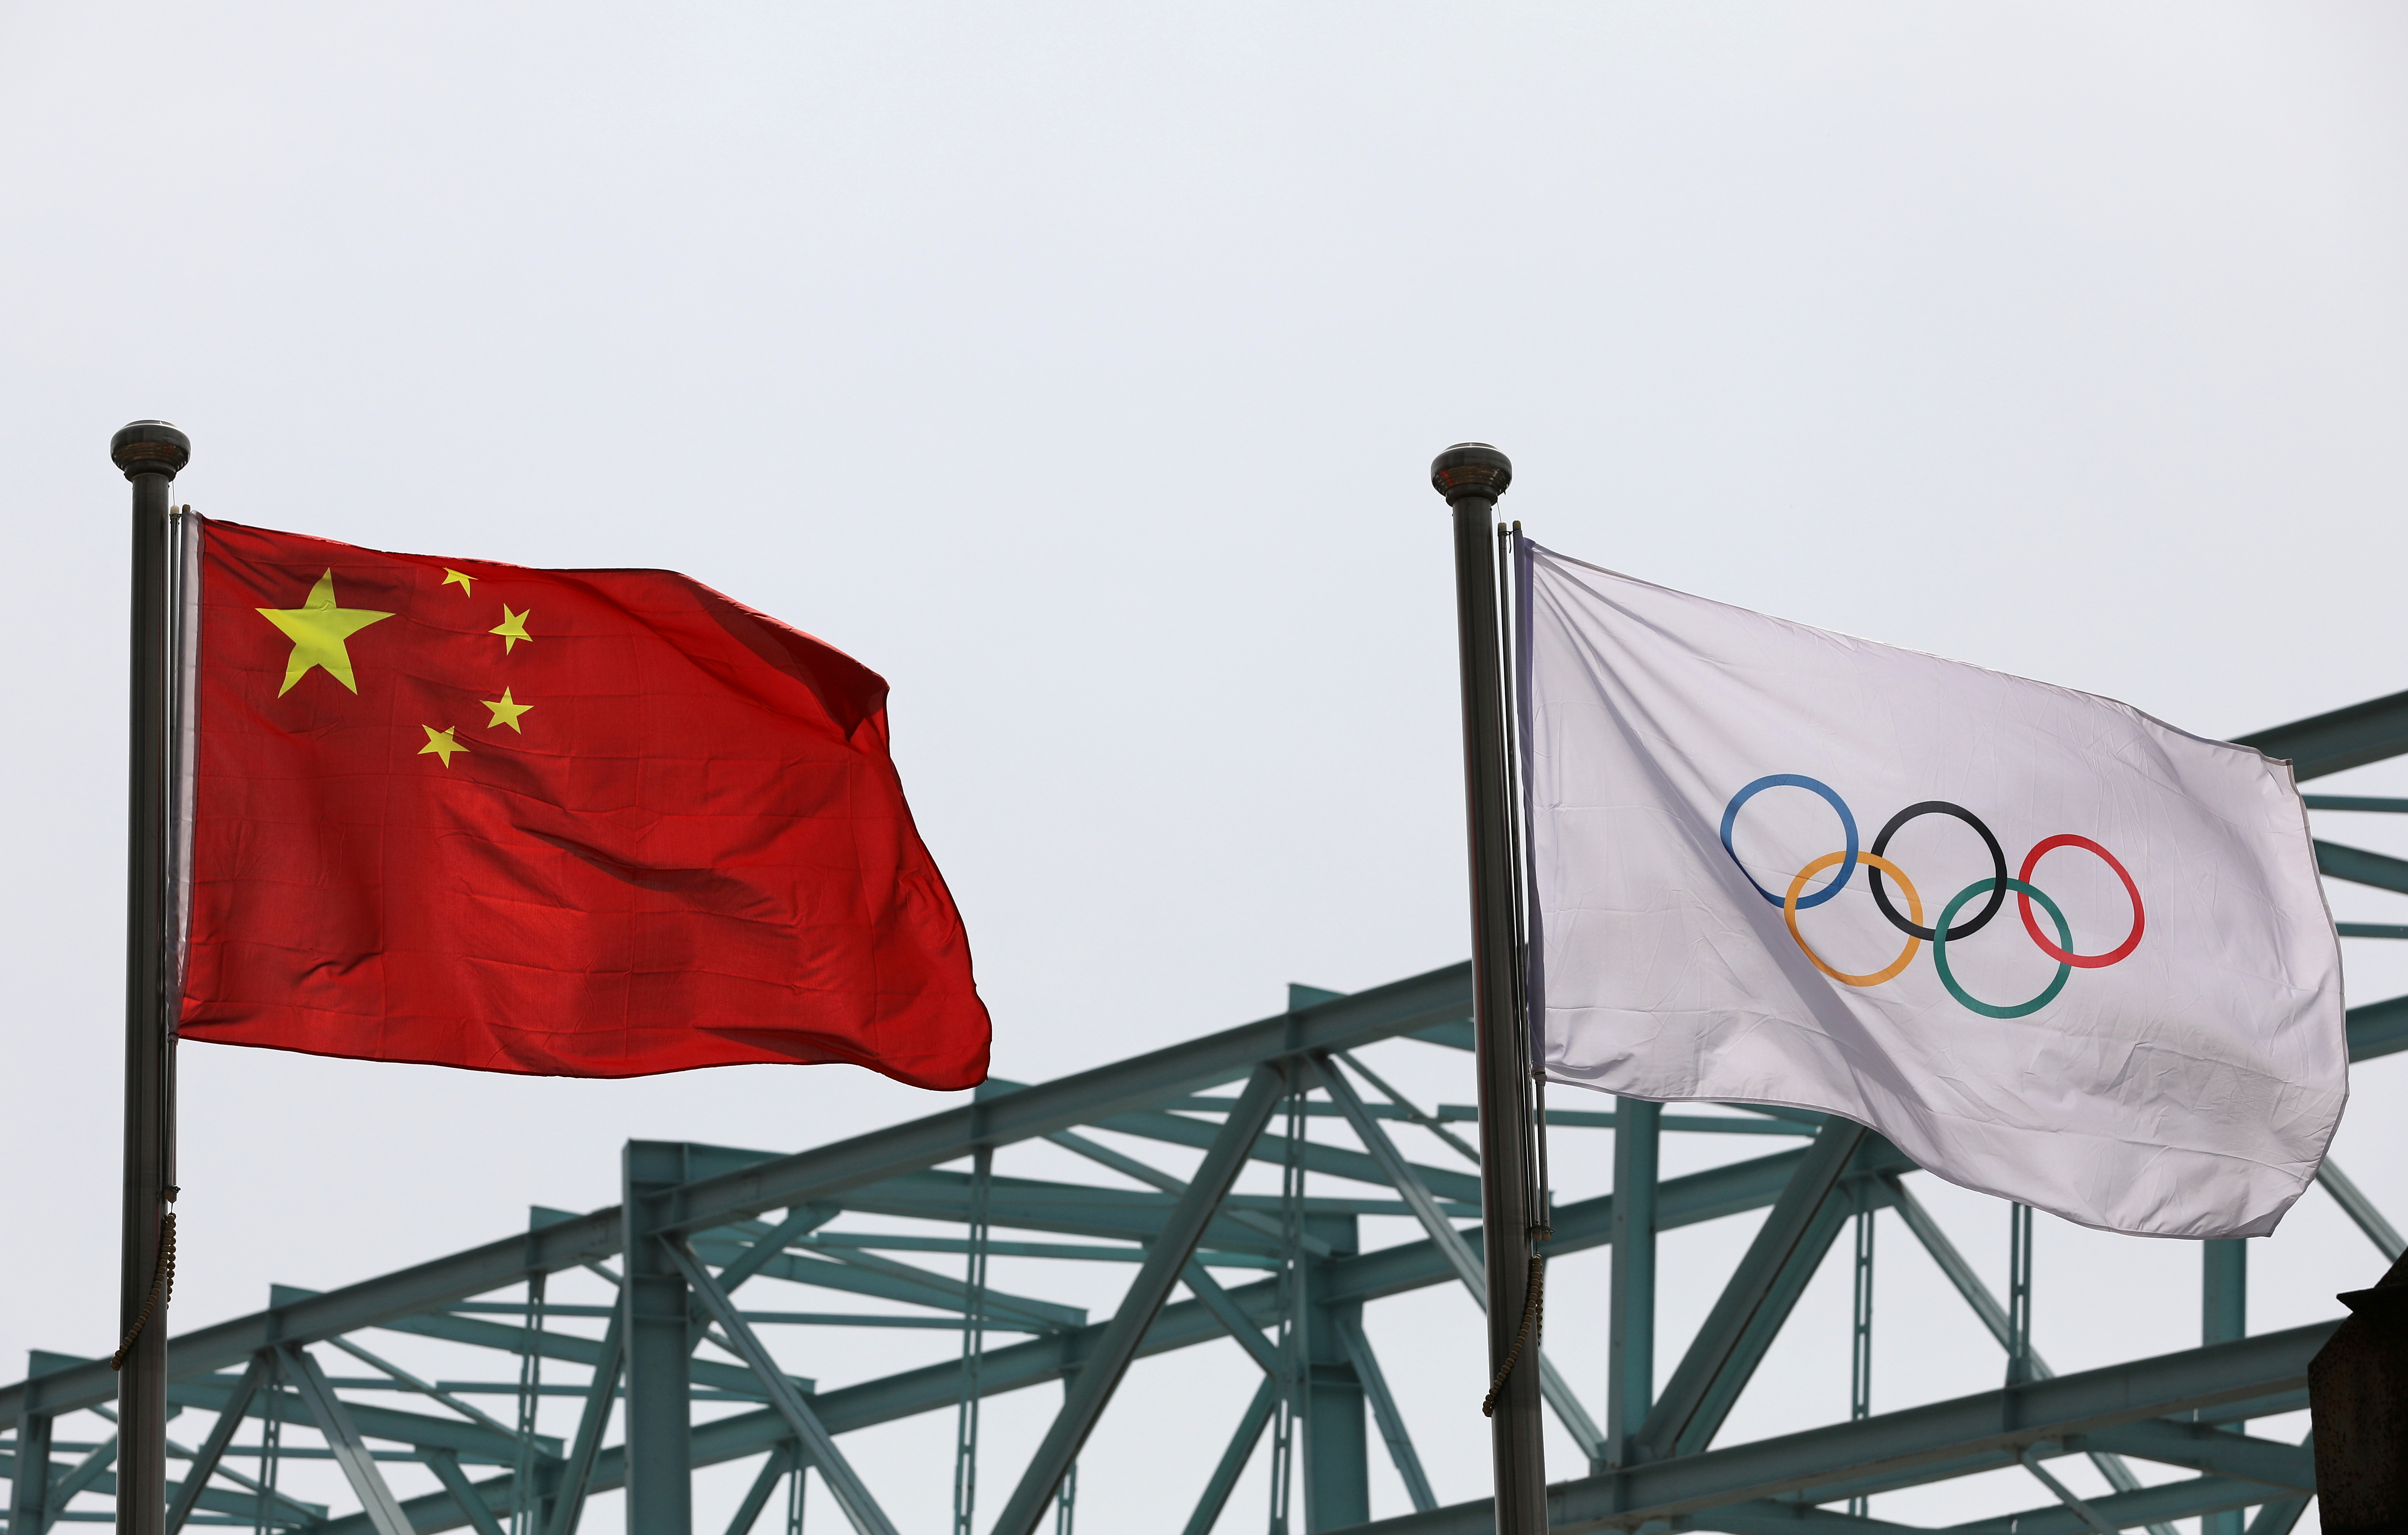 Chinese national flag flutters next to an Olympic flag at the Beijing Organising Committee for the 2022 Olympic and Paralympic Winter Games, in Beijing